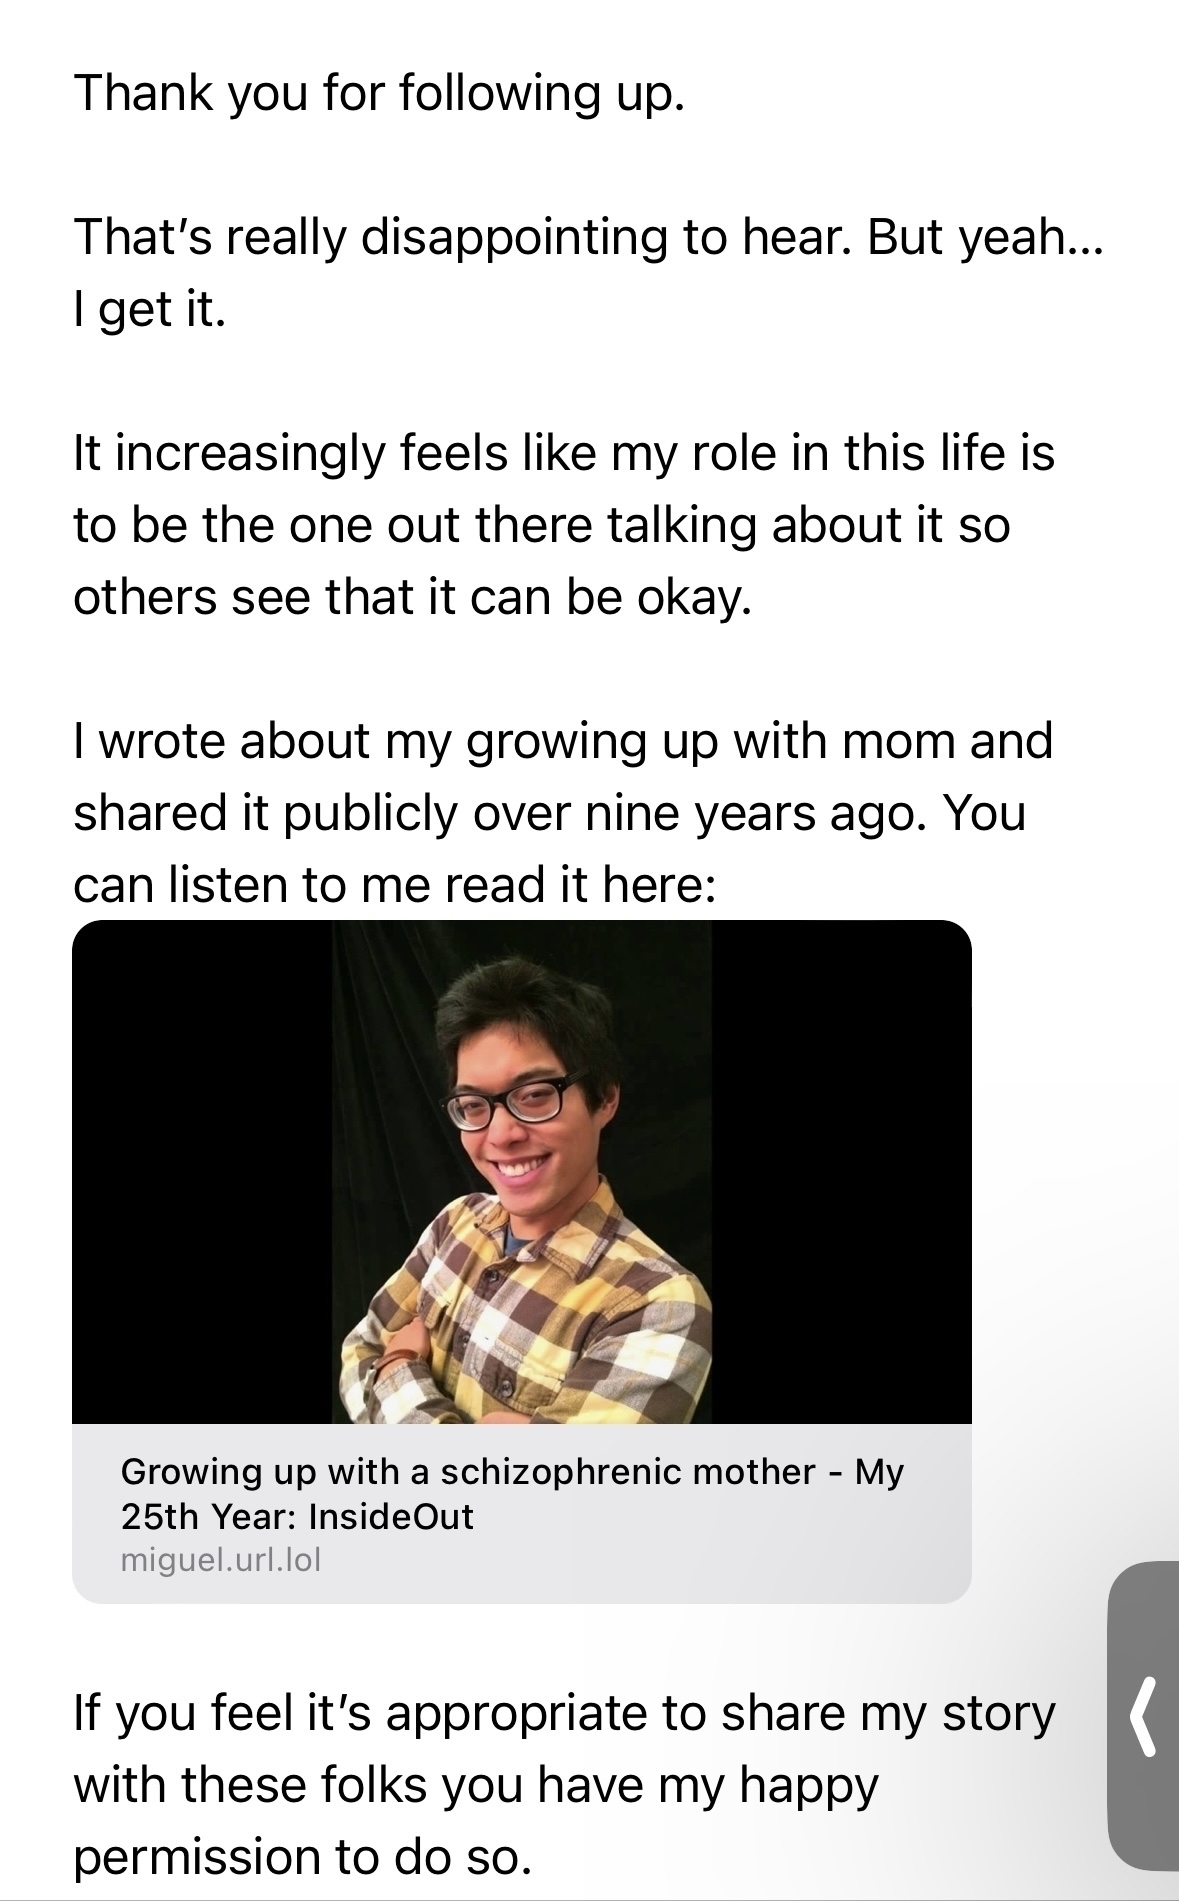 Thank you for following up.&10;That's really disappointing to hear. But yeah...&10;I get it.&10;It increasingly feels like my role in this life is to be the one out there talking about it so others see that it can be okay.&10;I wrote about my growing up with mom and shared it publicly over nine years ago. You can listen to me read it here:&10;Growing up with a schizophrenic mother - My 25th Year: InsideOut miguel.url.lol&10;If you feel it's appropriate to share my story with these folks you have my happy permission to do so.